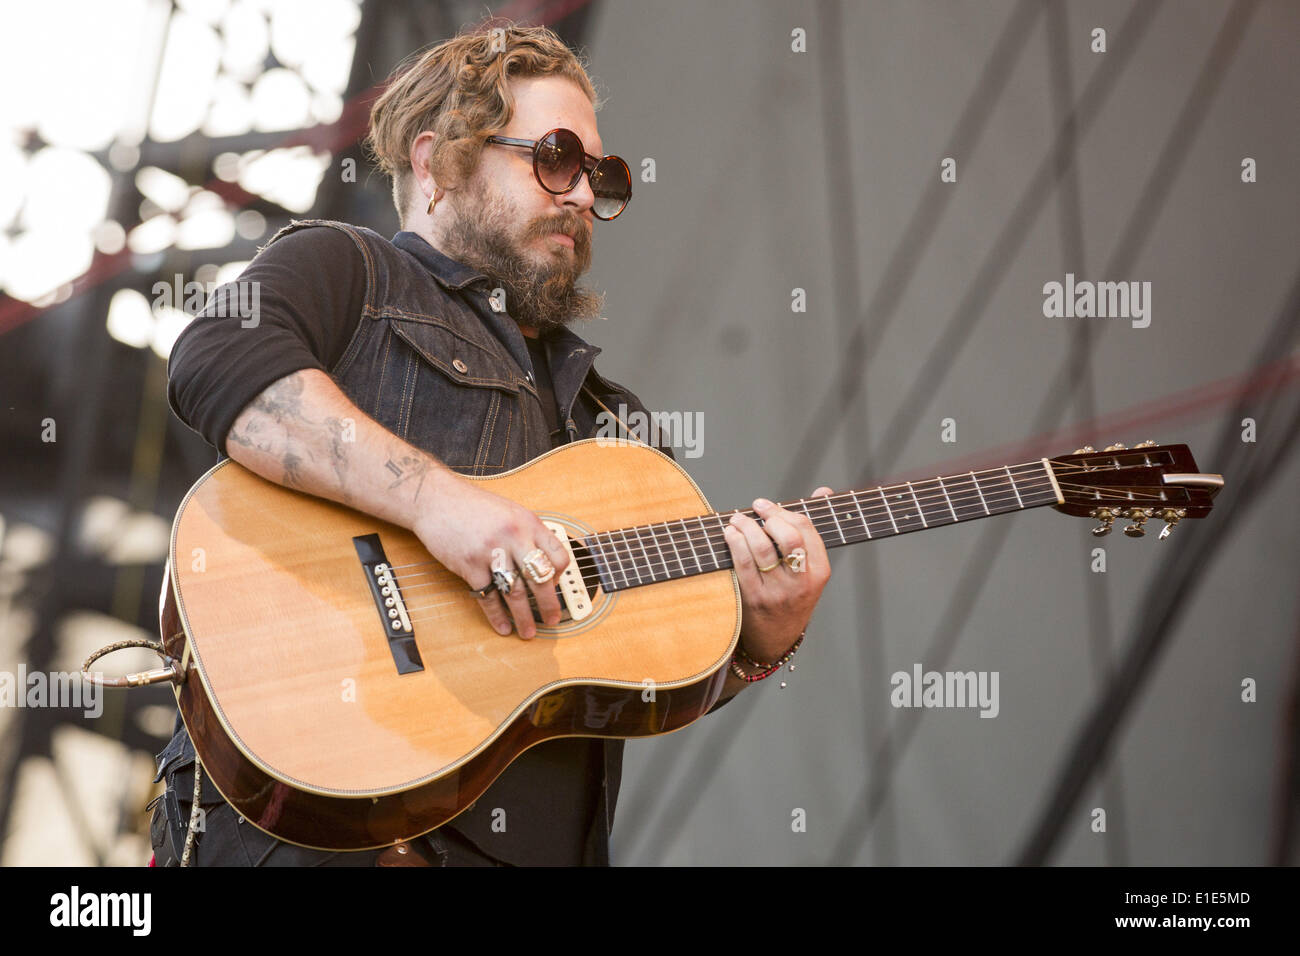 Chicago, Illinois, USA. 31st May, 2014. CHRISTIAN LETTS performs with Edward Sharpe and the Magnetic Zeros at the FirstMerit Bank Pavilion at Northerly Island in Chicago, Illinois © Daniel DeSlover/ZUMAPRESS.com/Alamy Live News Stock Photo